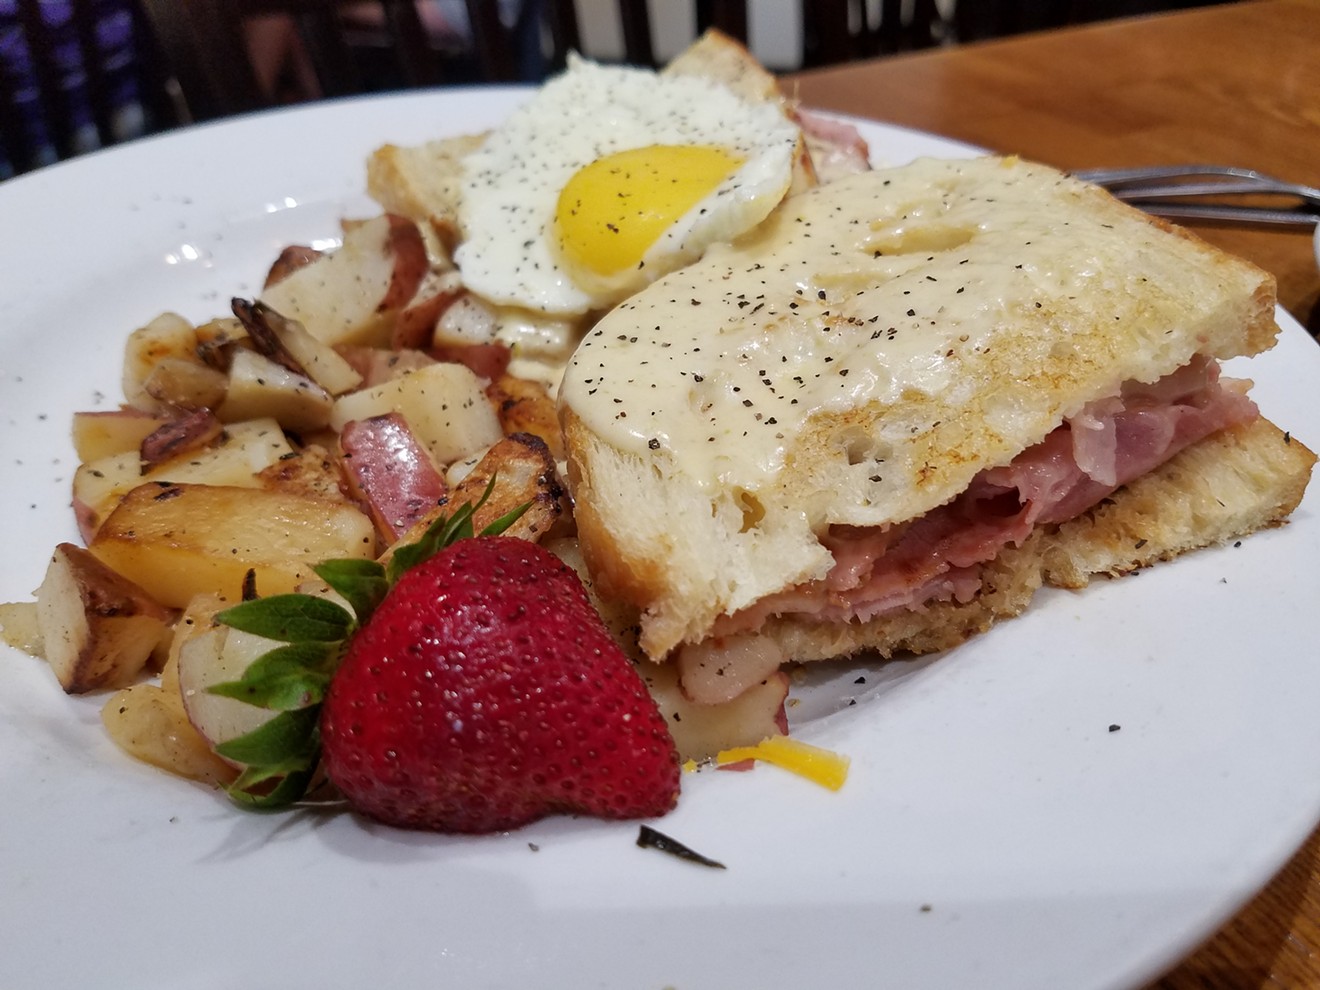 This croque-madame gives weight to the idea that more sandwiches should be named after gender-specific titles. Hypothetical examples include the Mr. BLT and Mrs. Tuna Melt.